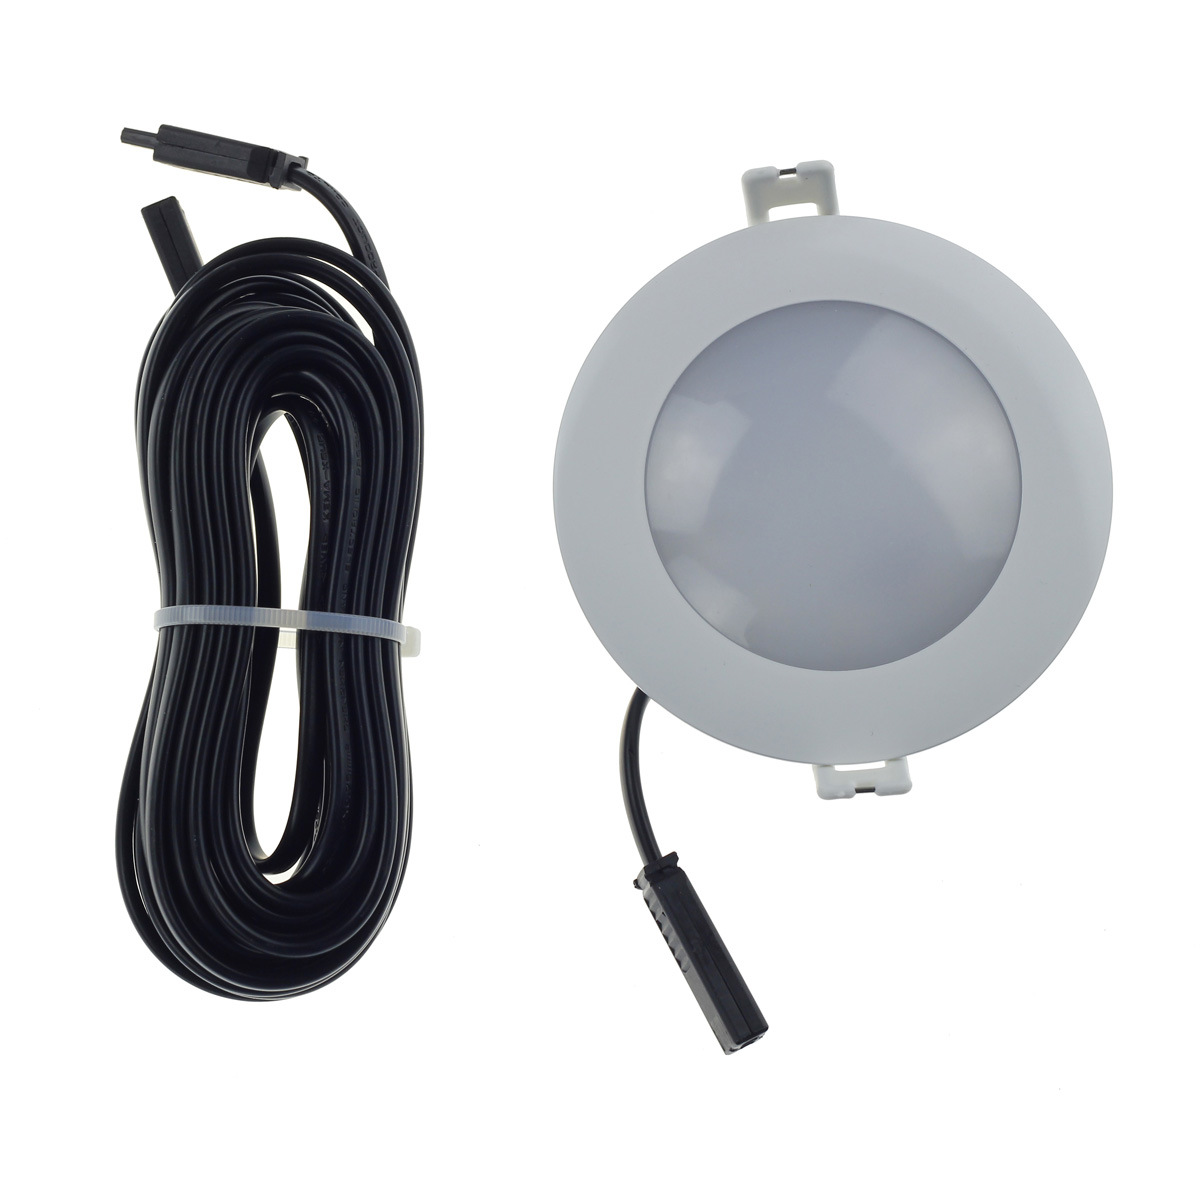 Recessed Dimmable 8W LED Ceiling Light with Samsung Chips